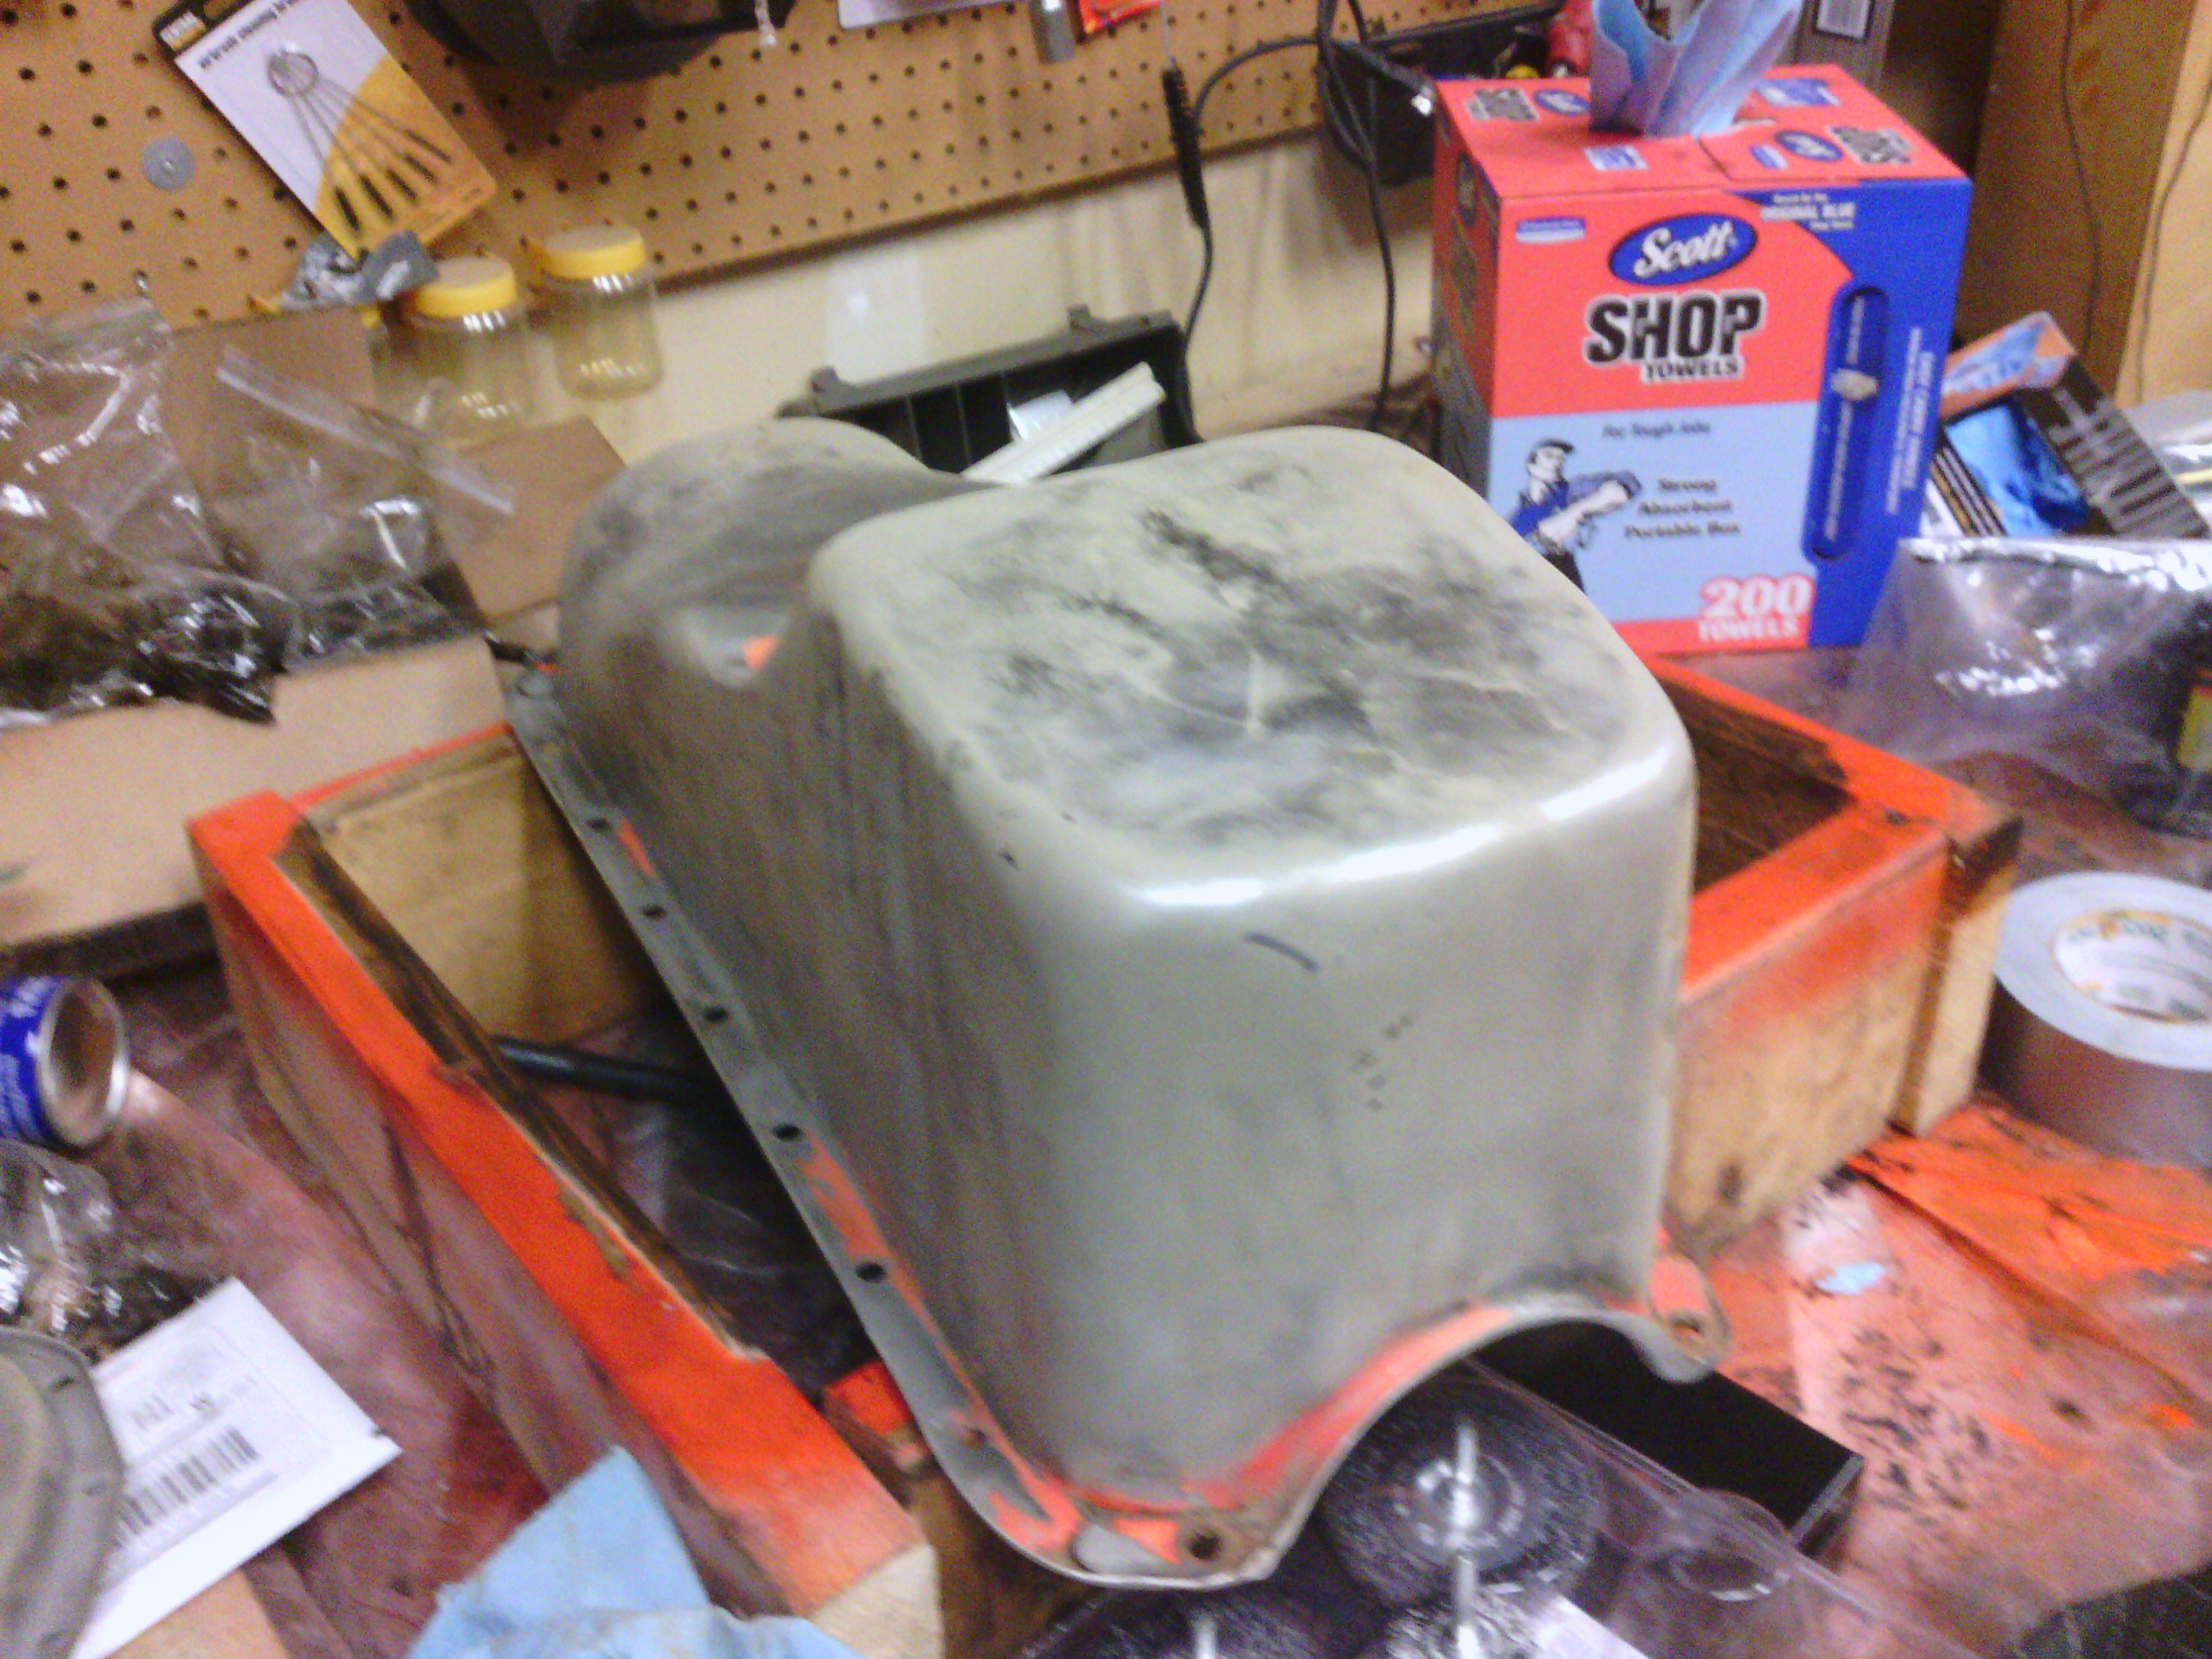 There is still some work to do on the oil pan.